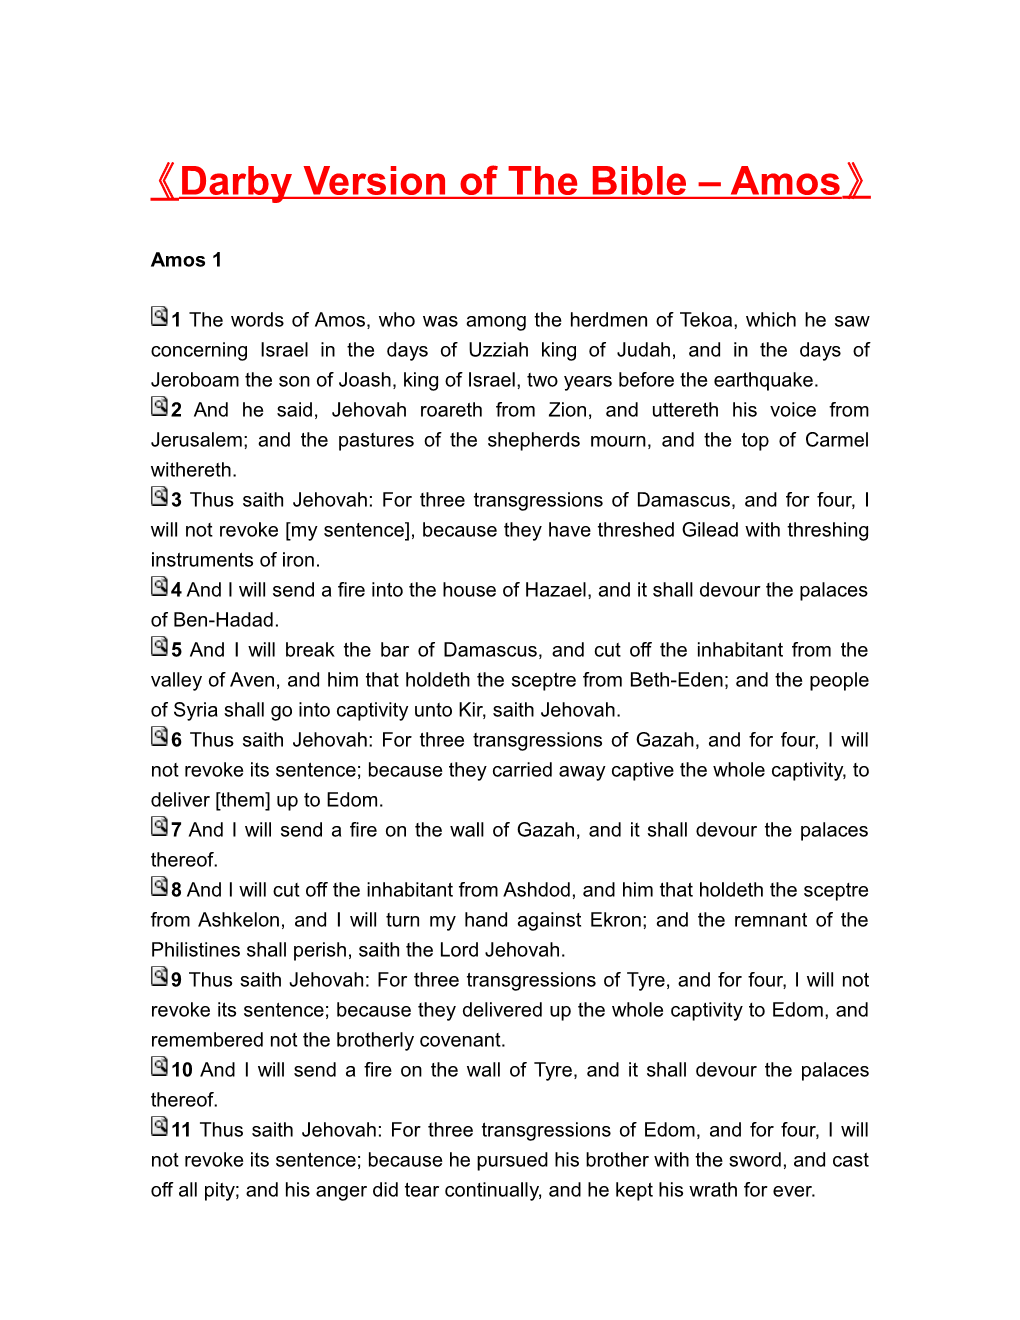 Darby Version of the Bible Amos